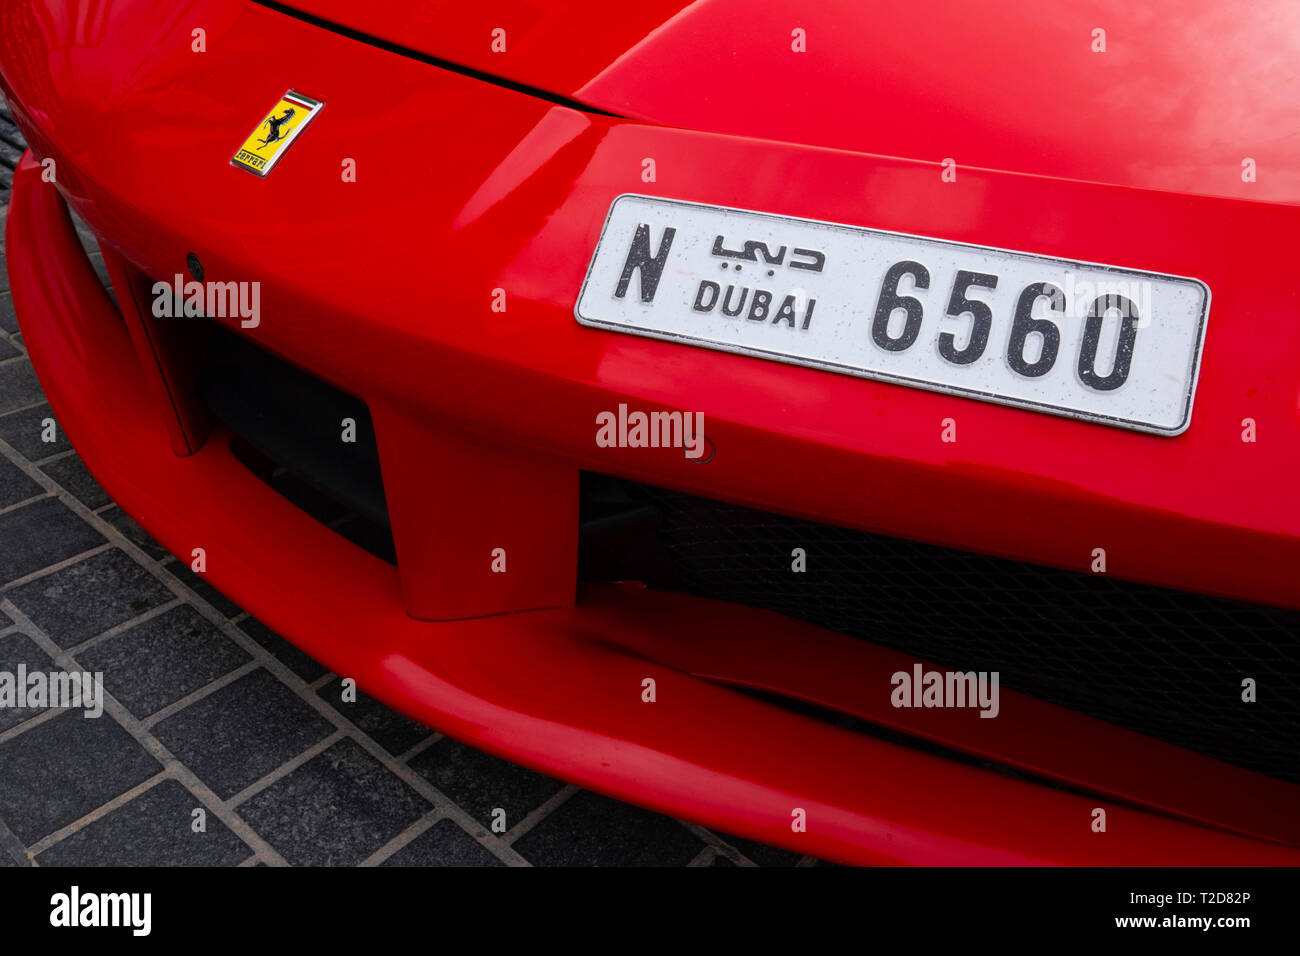 Frontal view of a red Ferrari supercar with a Dubai license plate Stock Photo